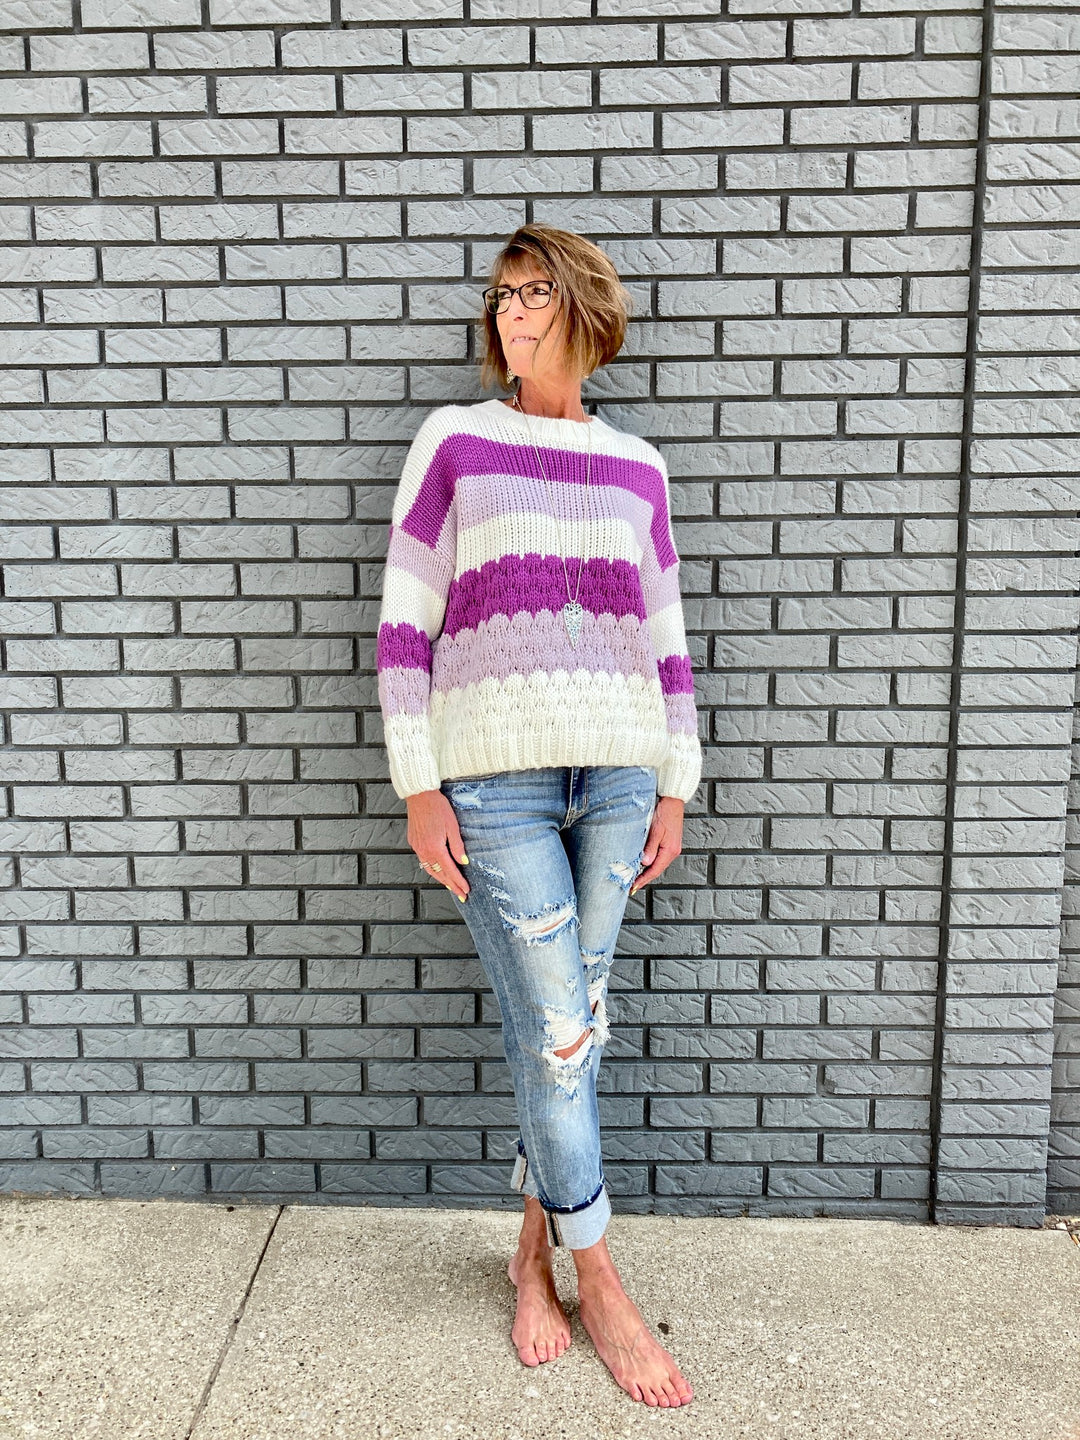 Shop The Look: Textured Stripes & Destroyed Jeans